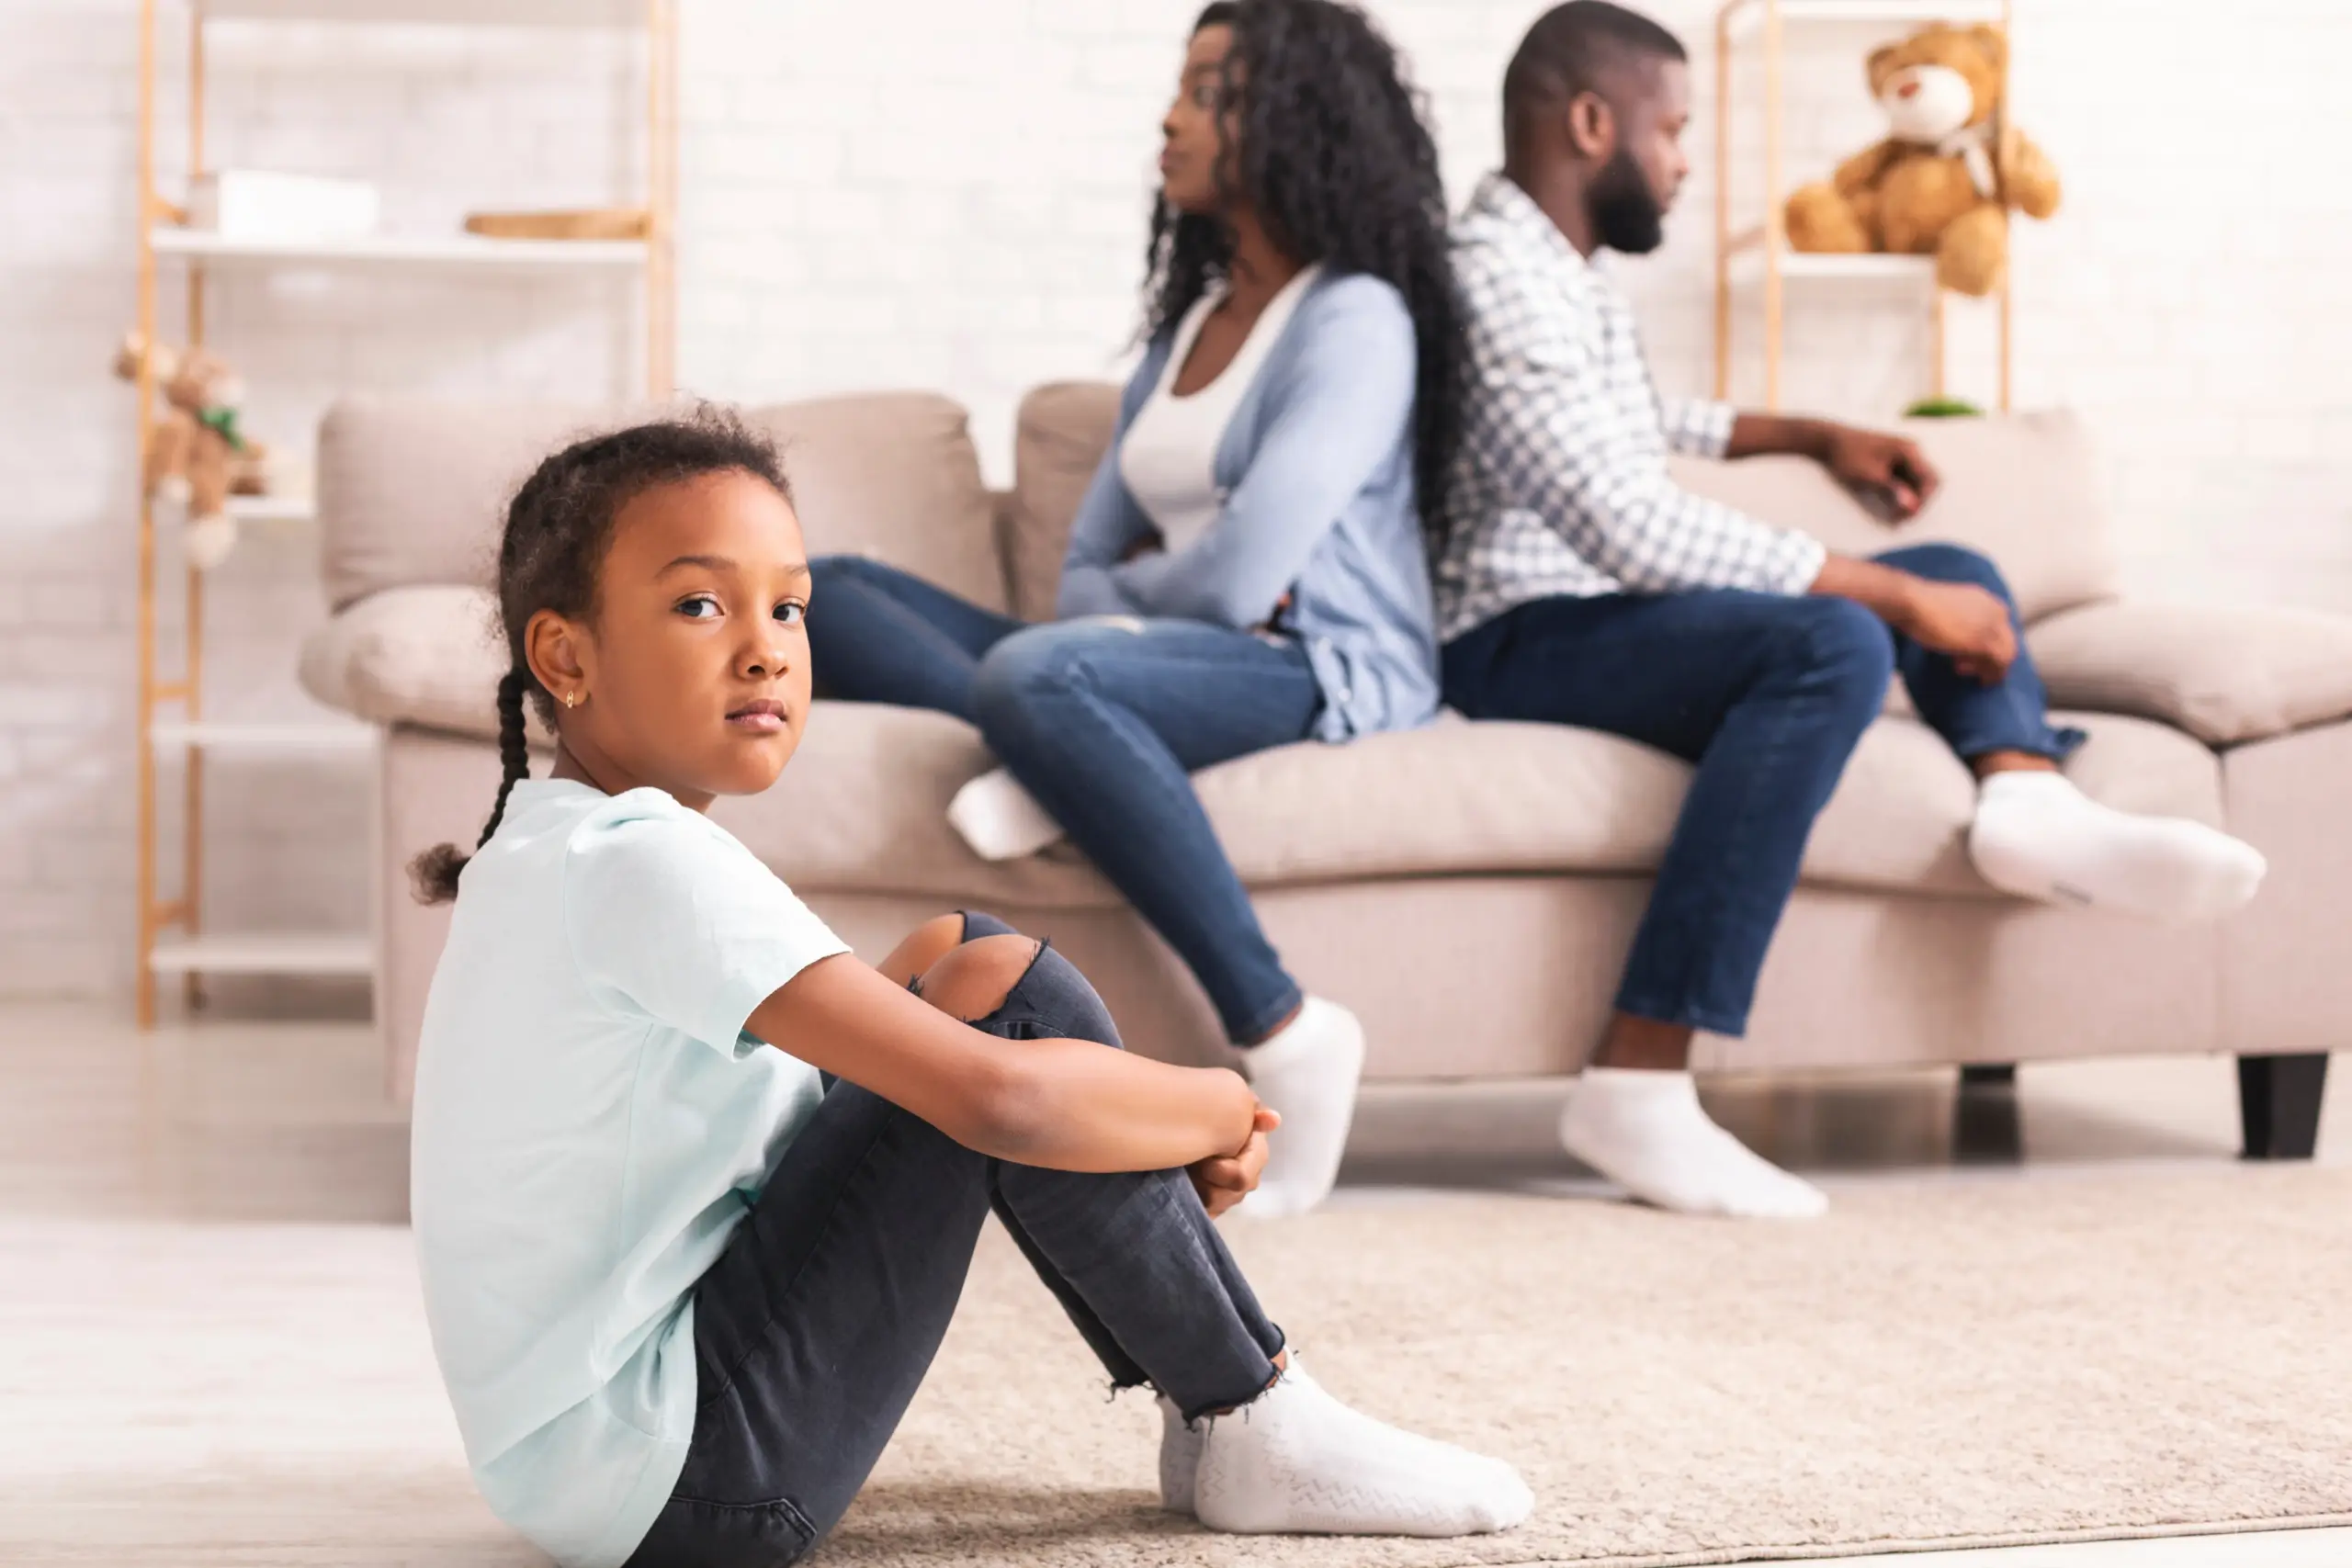 Girl looking at camera with her knees to her chest as arguing parents sit on a couch back to back, not talking.